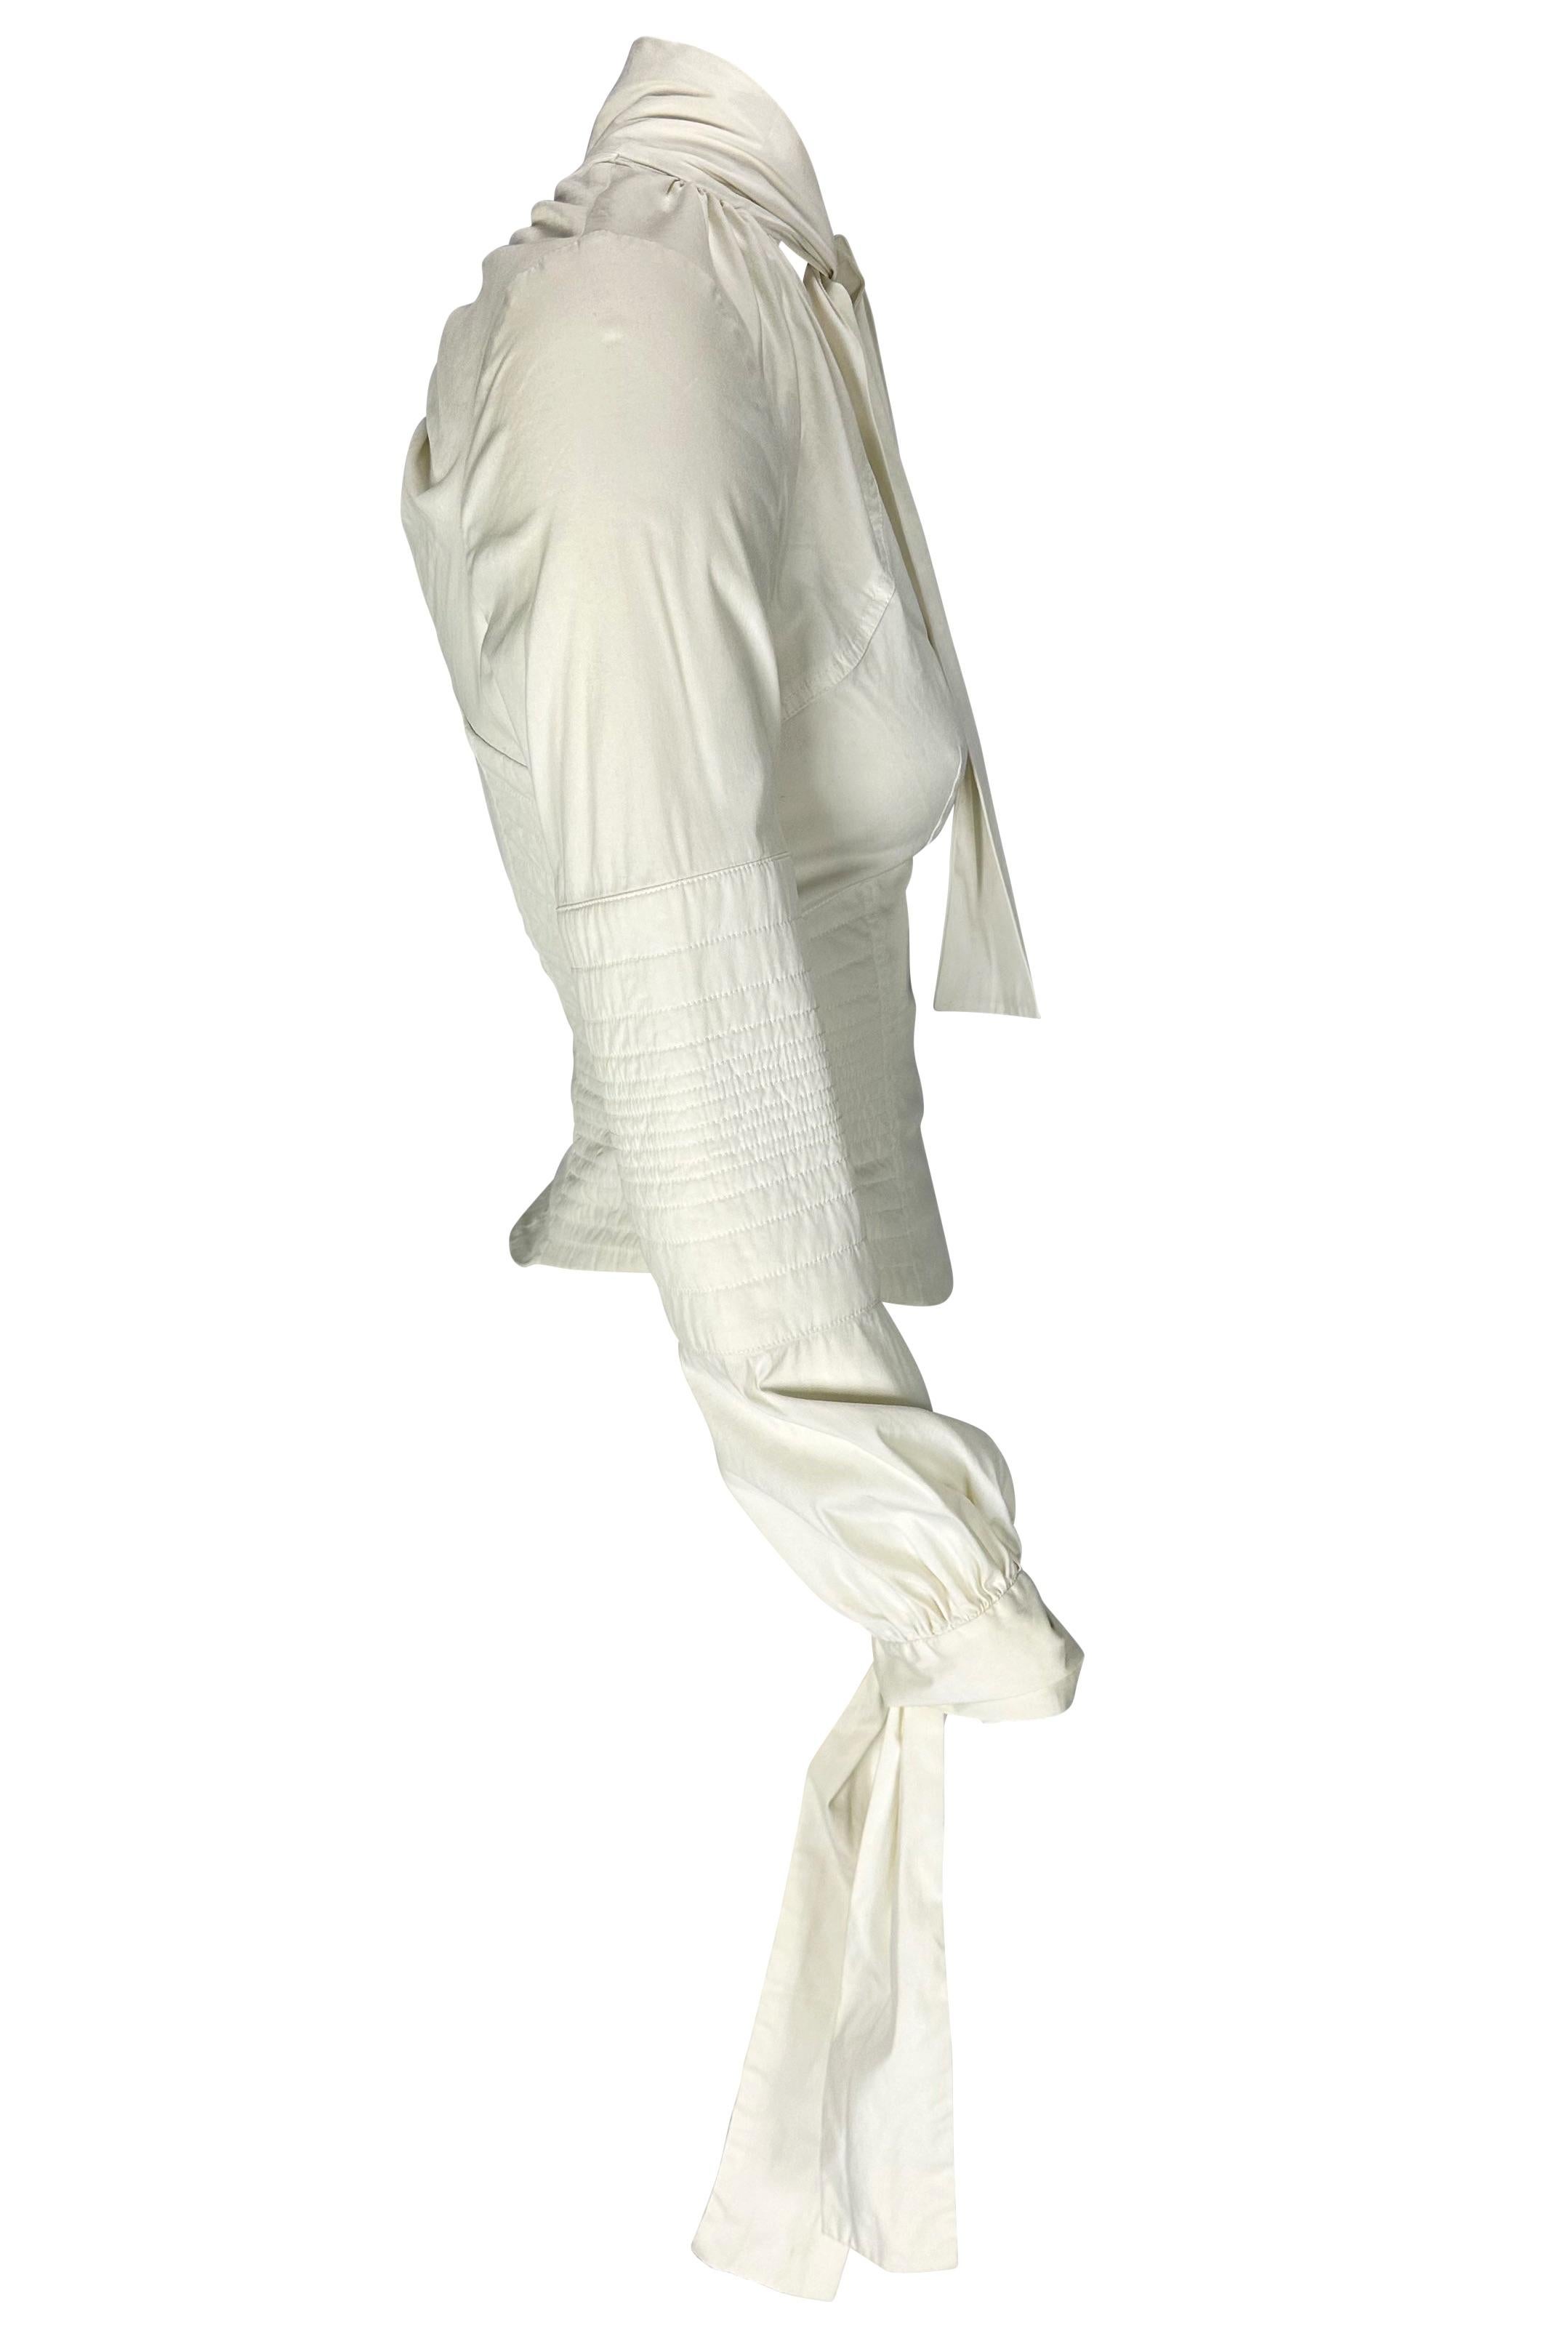 F/W 2003 Gucci by Tom Ford Ruched White Stretch Cotton Quilted Tie Blouse For Sale 1